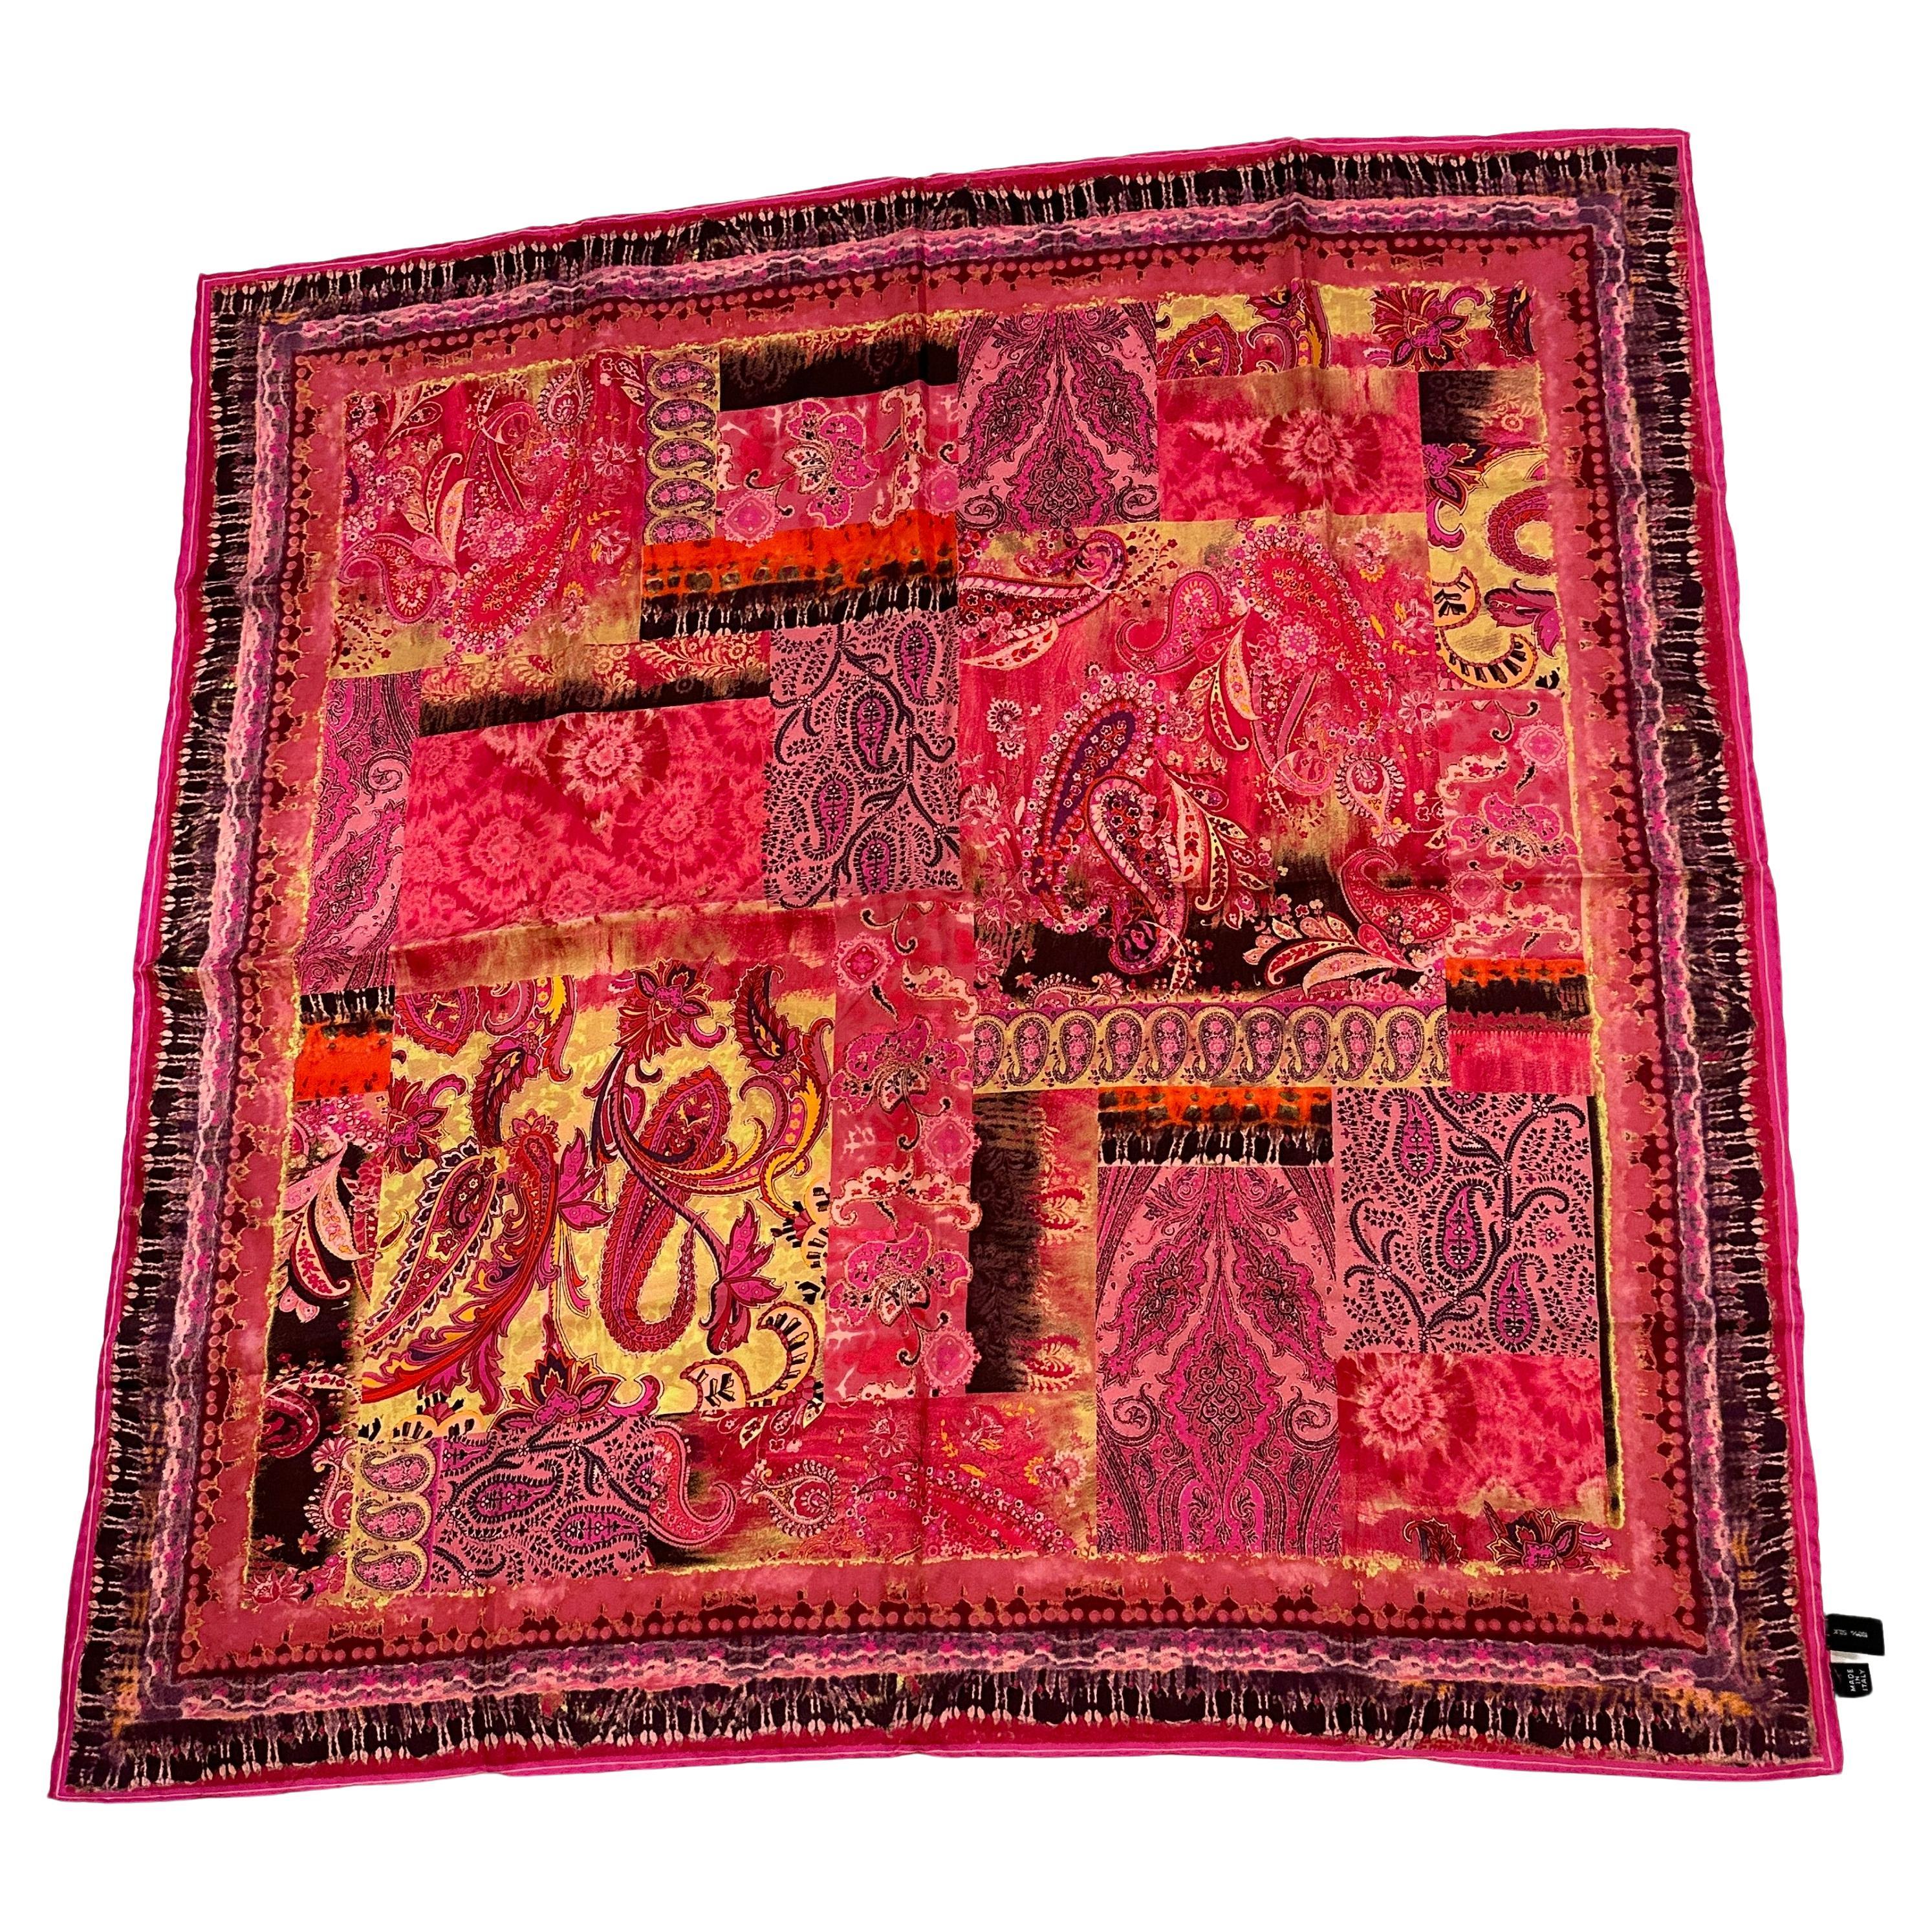 Beautiful Shades Of Fuchsia, Pinks & Purple "Abstract Patchwork" Silk Scarf For Sale